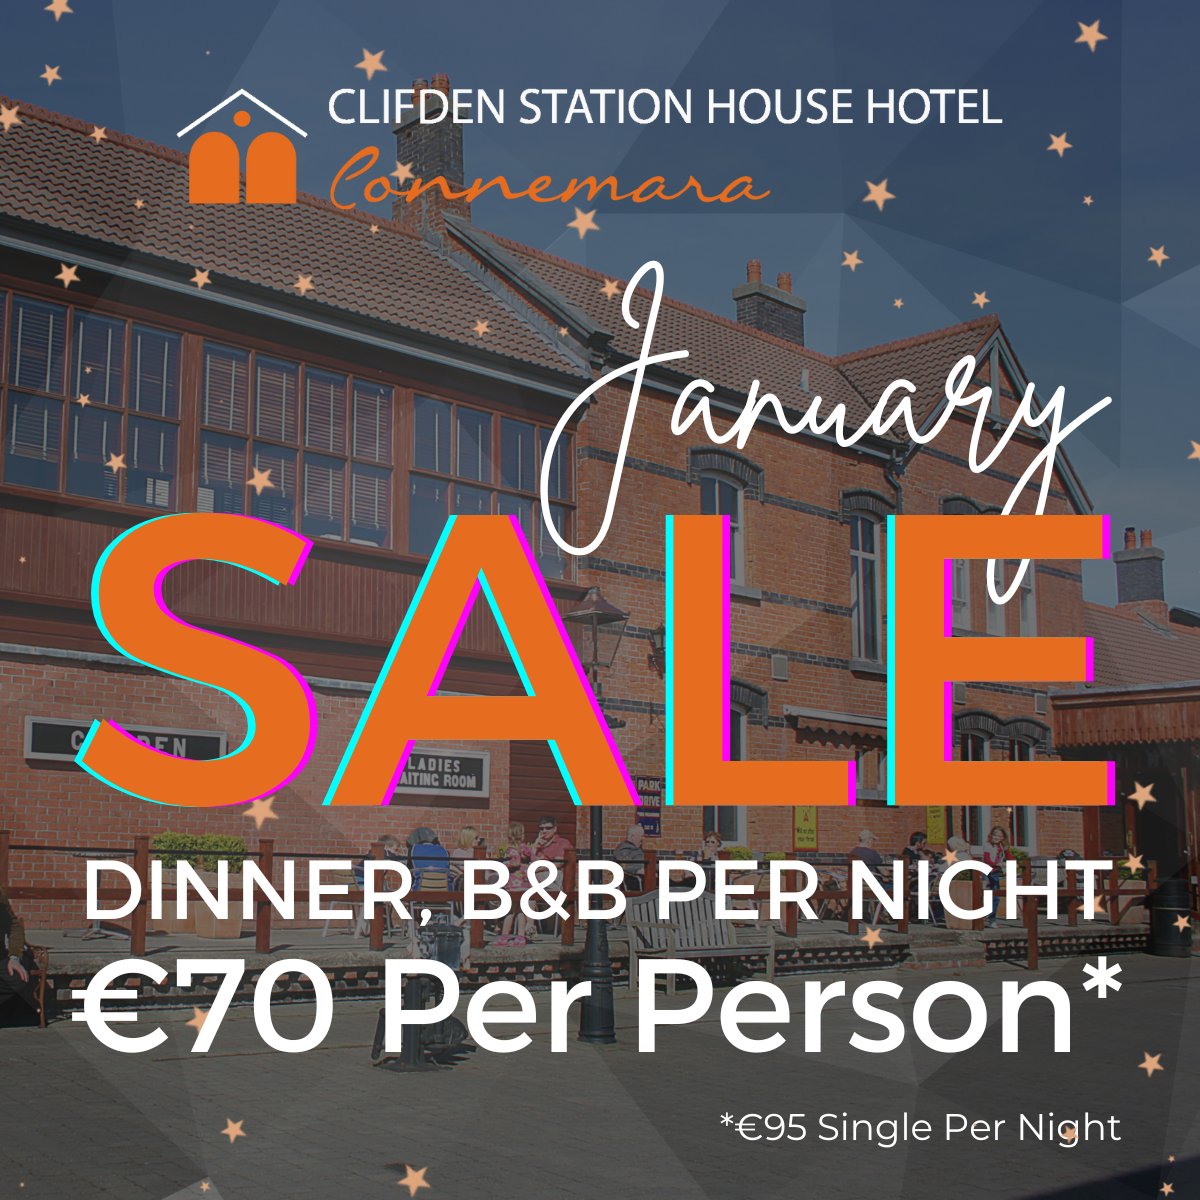 🎊January Sale - Now On! 😊 Book a Dinner, Bed & Breakfast break in the Clifden Station House Hotel for just €70 per person sharing per night. Single rate of €95 also available. Book Direct and Save Today! bit.ly/3E0EkxS #welcome2023 #clifdenstationhouse